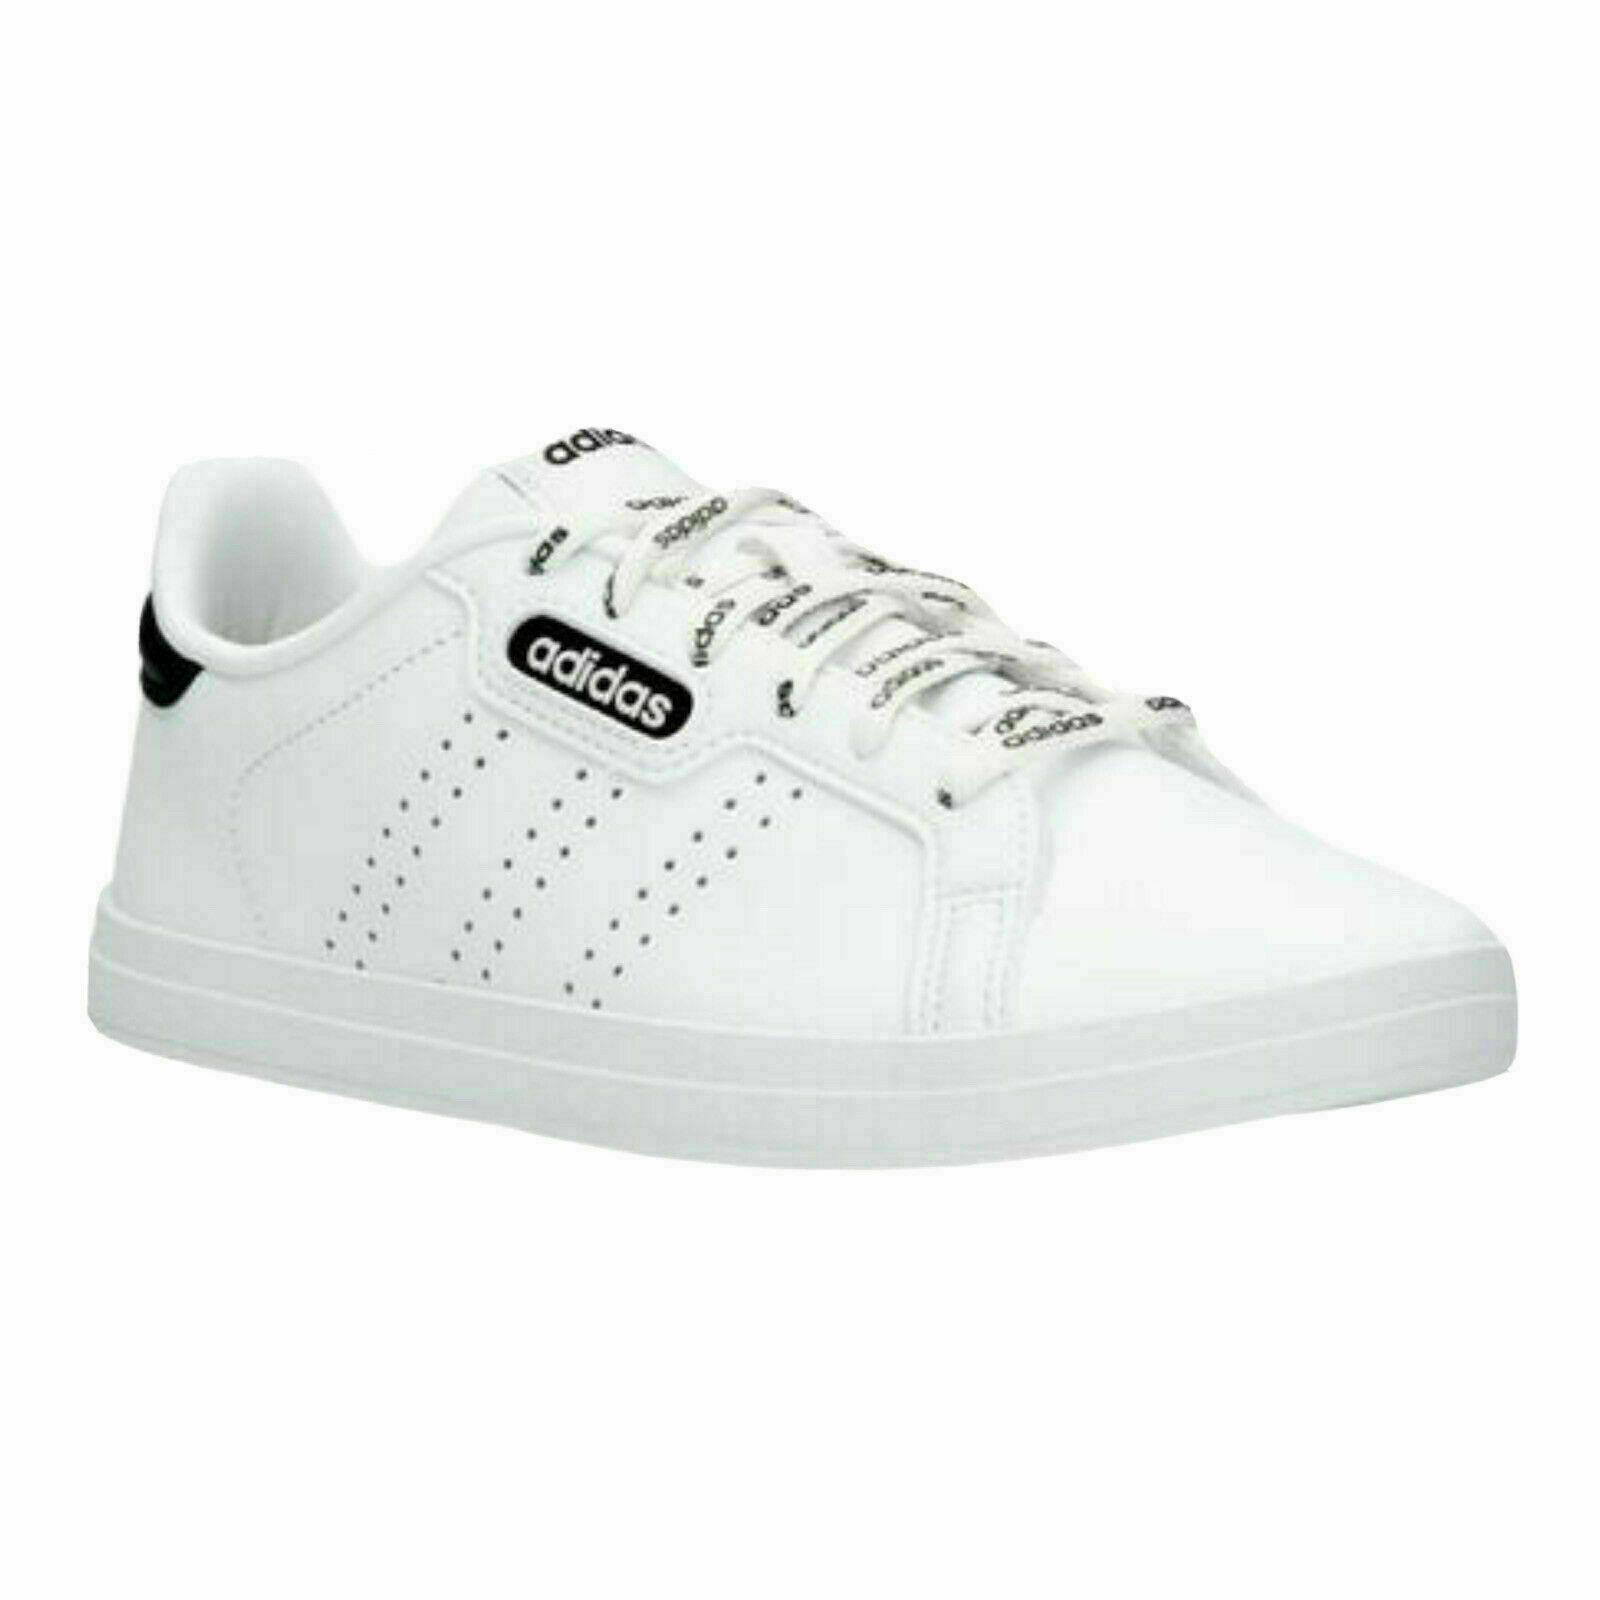 Adidas Courtpoint Base Tennis Athletic Casual Sneaker Shoes Size 8 Womens - White